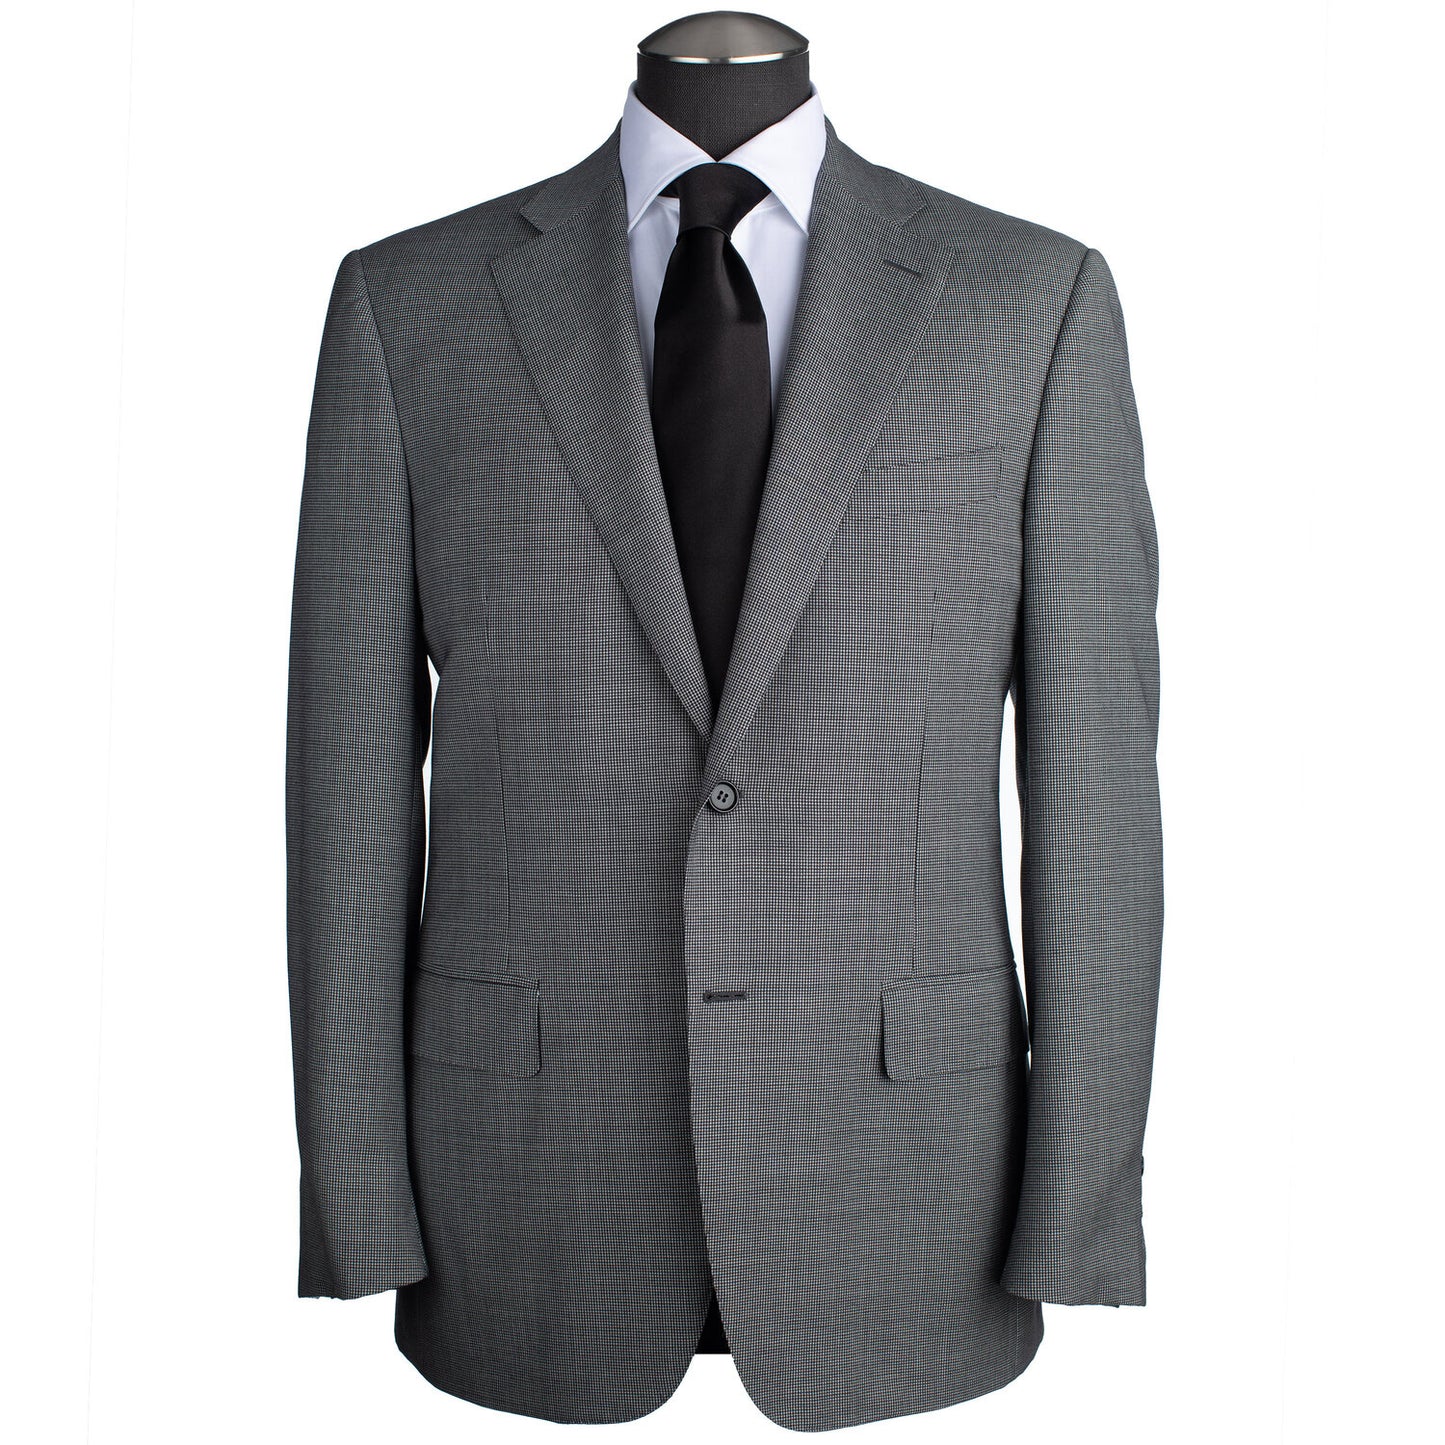 Canali Siena Model Suit in Mid Gray Nail Head